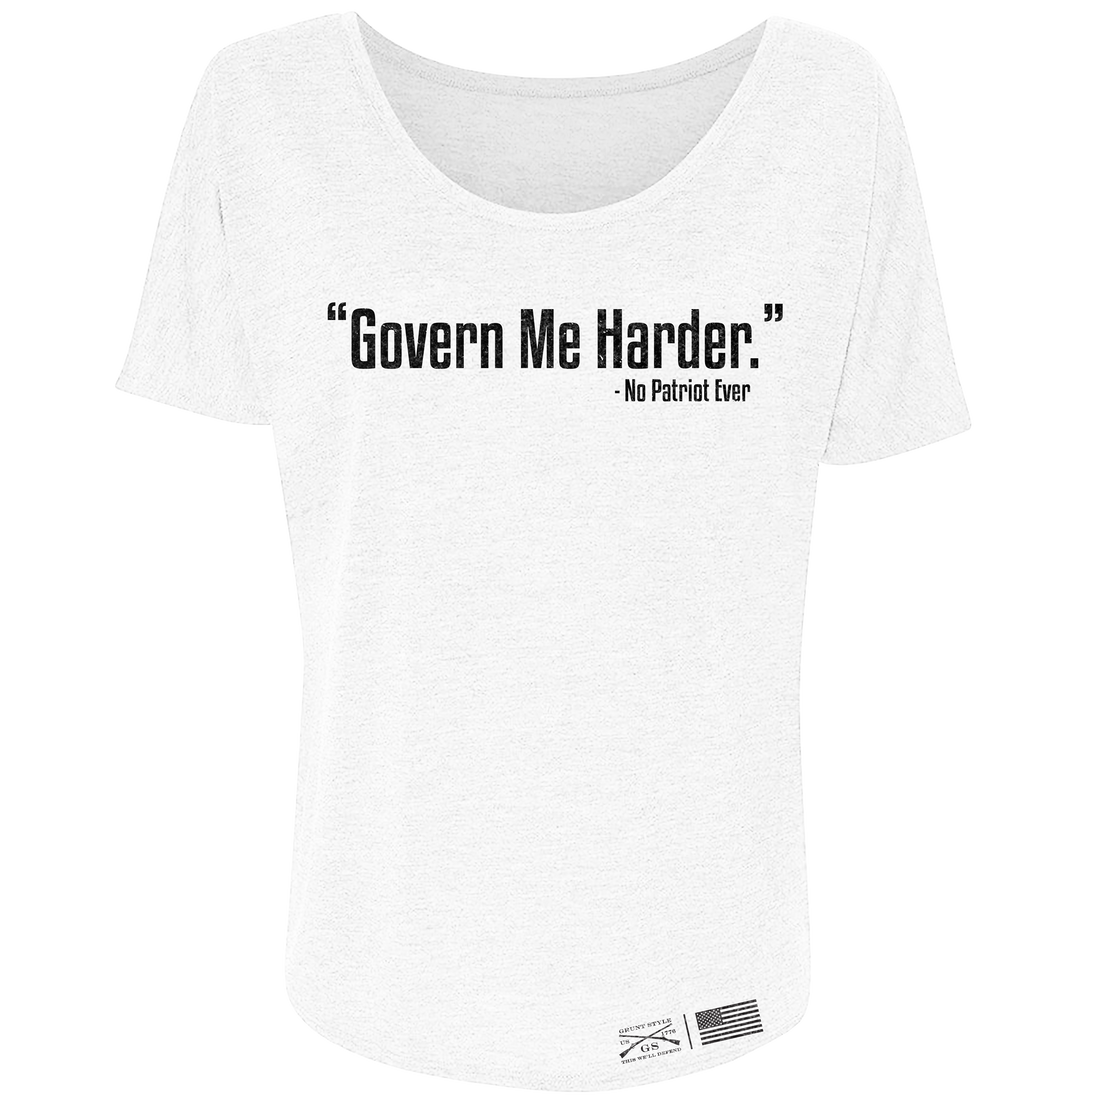 Women's Govern Me Harder Slouchy T-Shirt - White